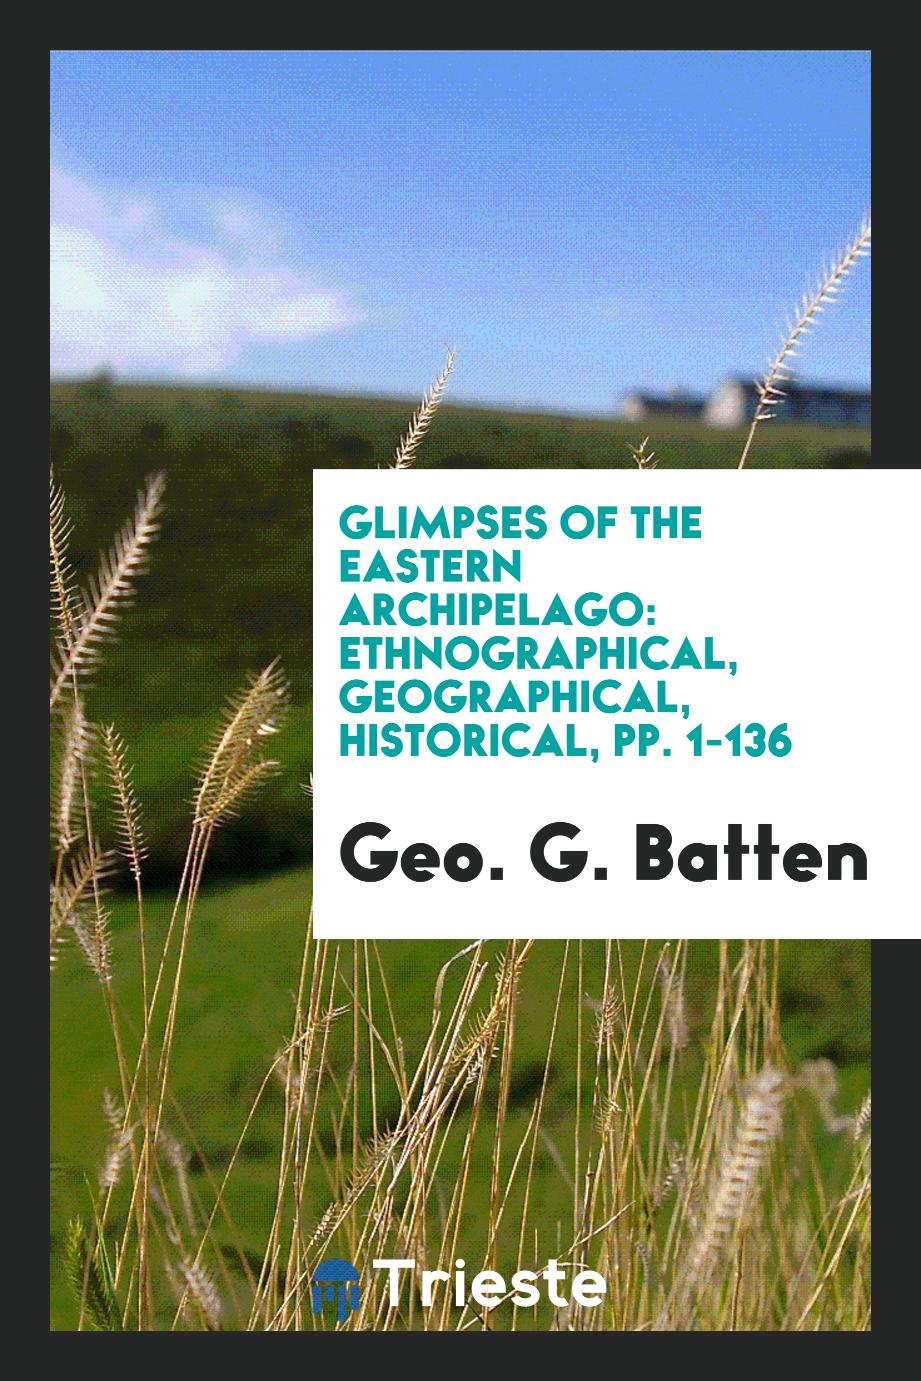 Glimpses of the Eastern Archipelago: Ethnographical, Geographical, Historical, pp. 1-136